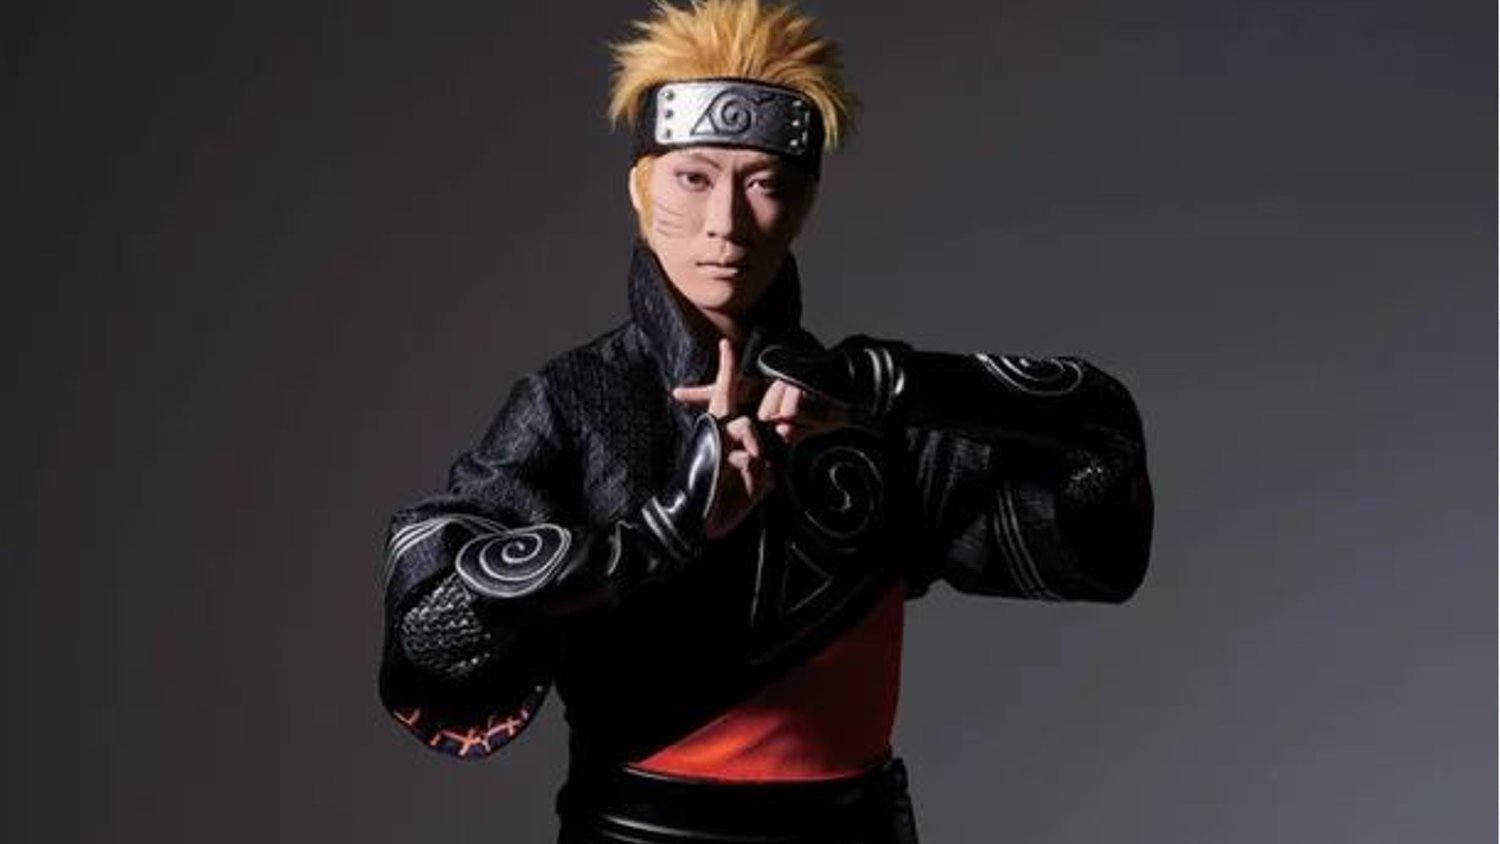 Naruto's live-action adaptation goes on floor, check out expected